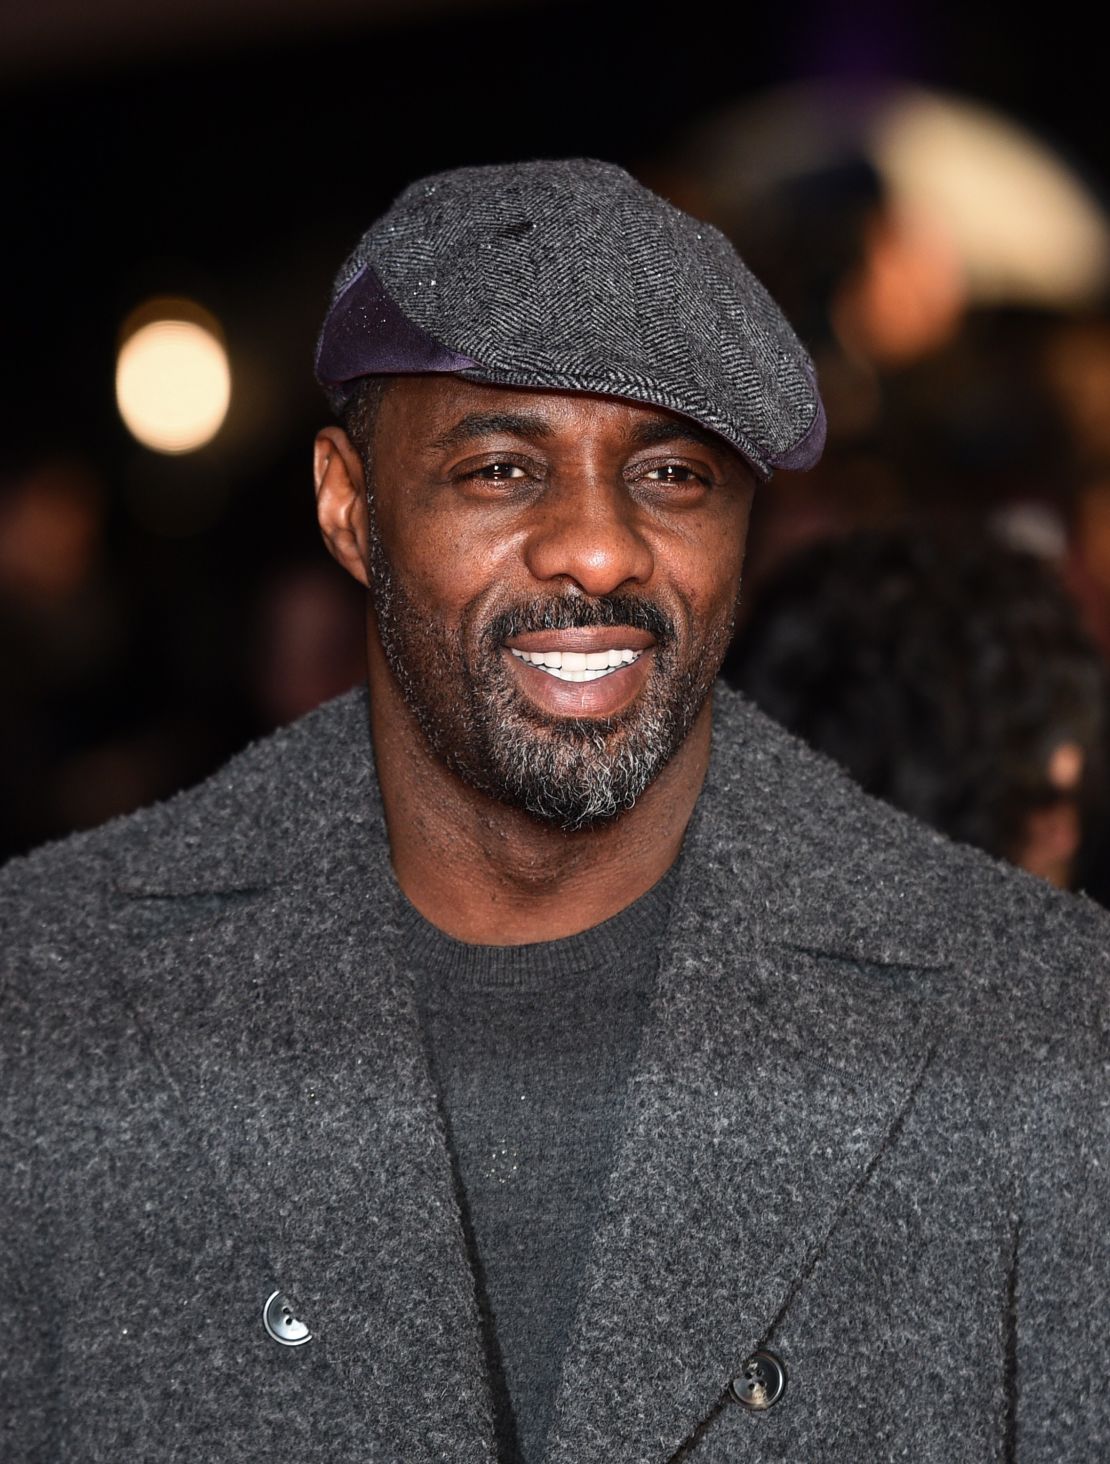 British actor Idris Elba poses for photographers ahead of the World Premiere of 'The Gunman' in central London on February 16, 2015.